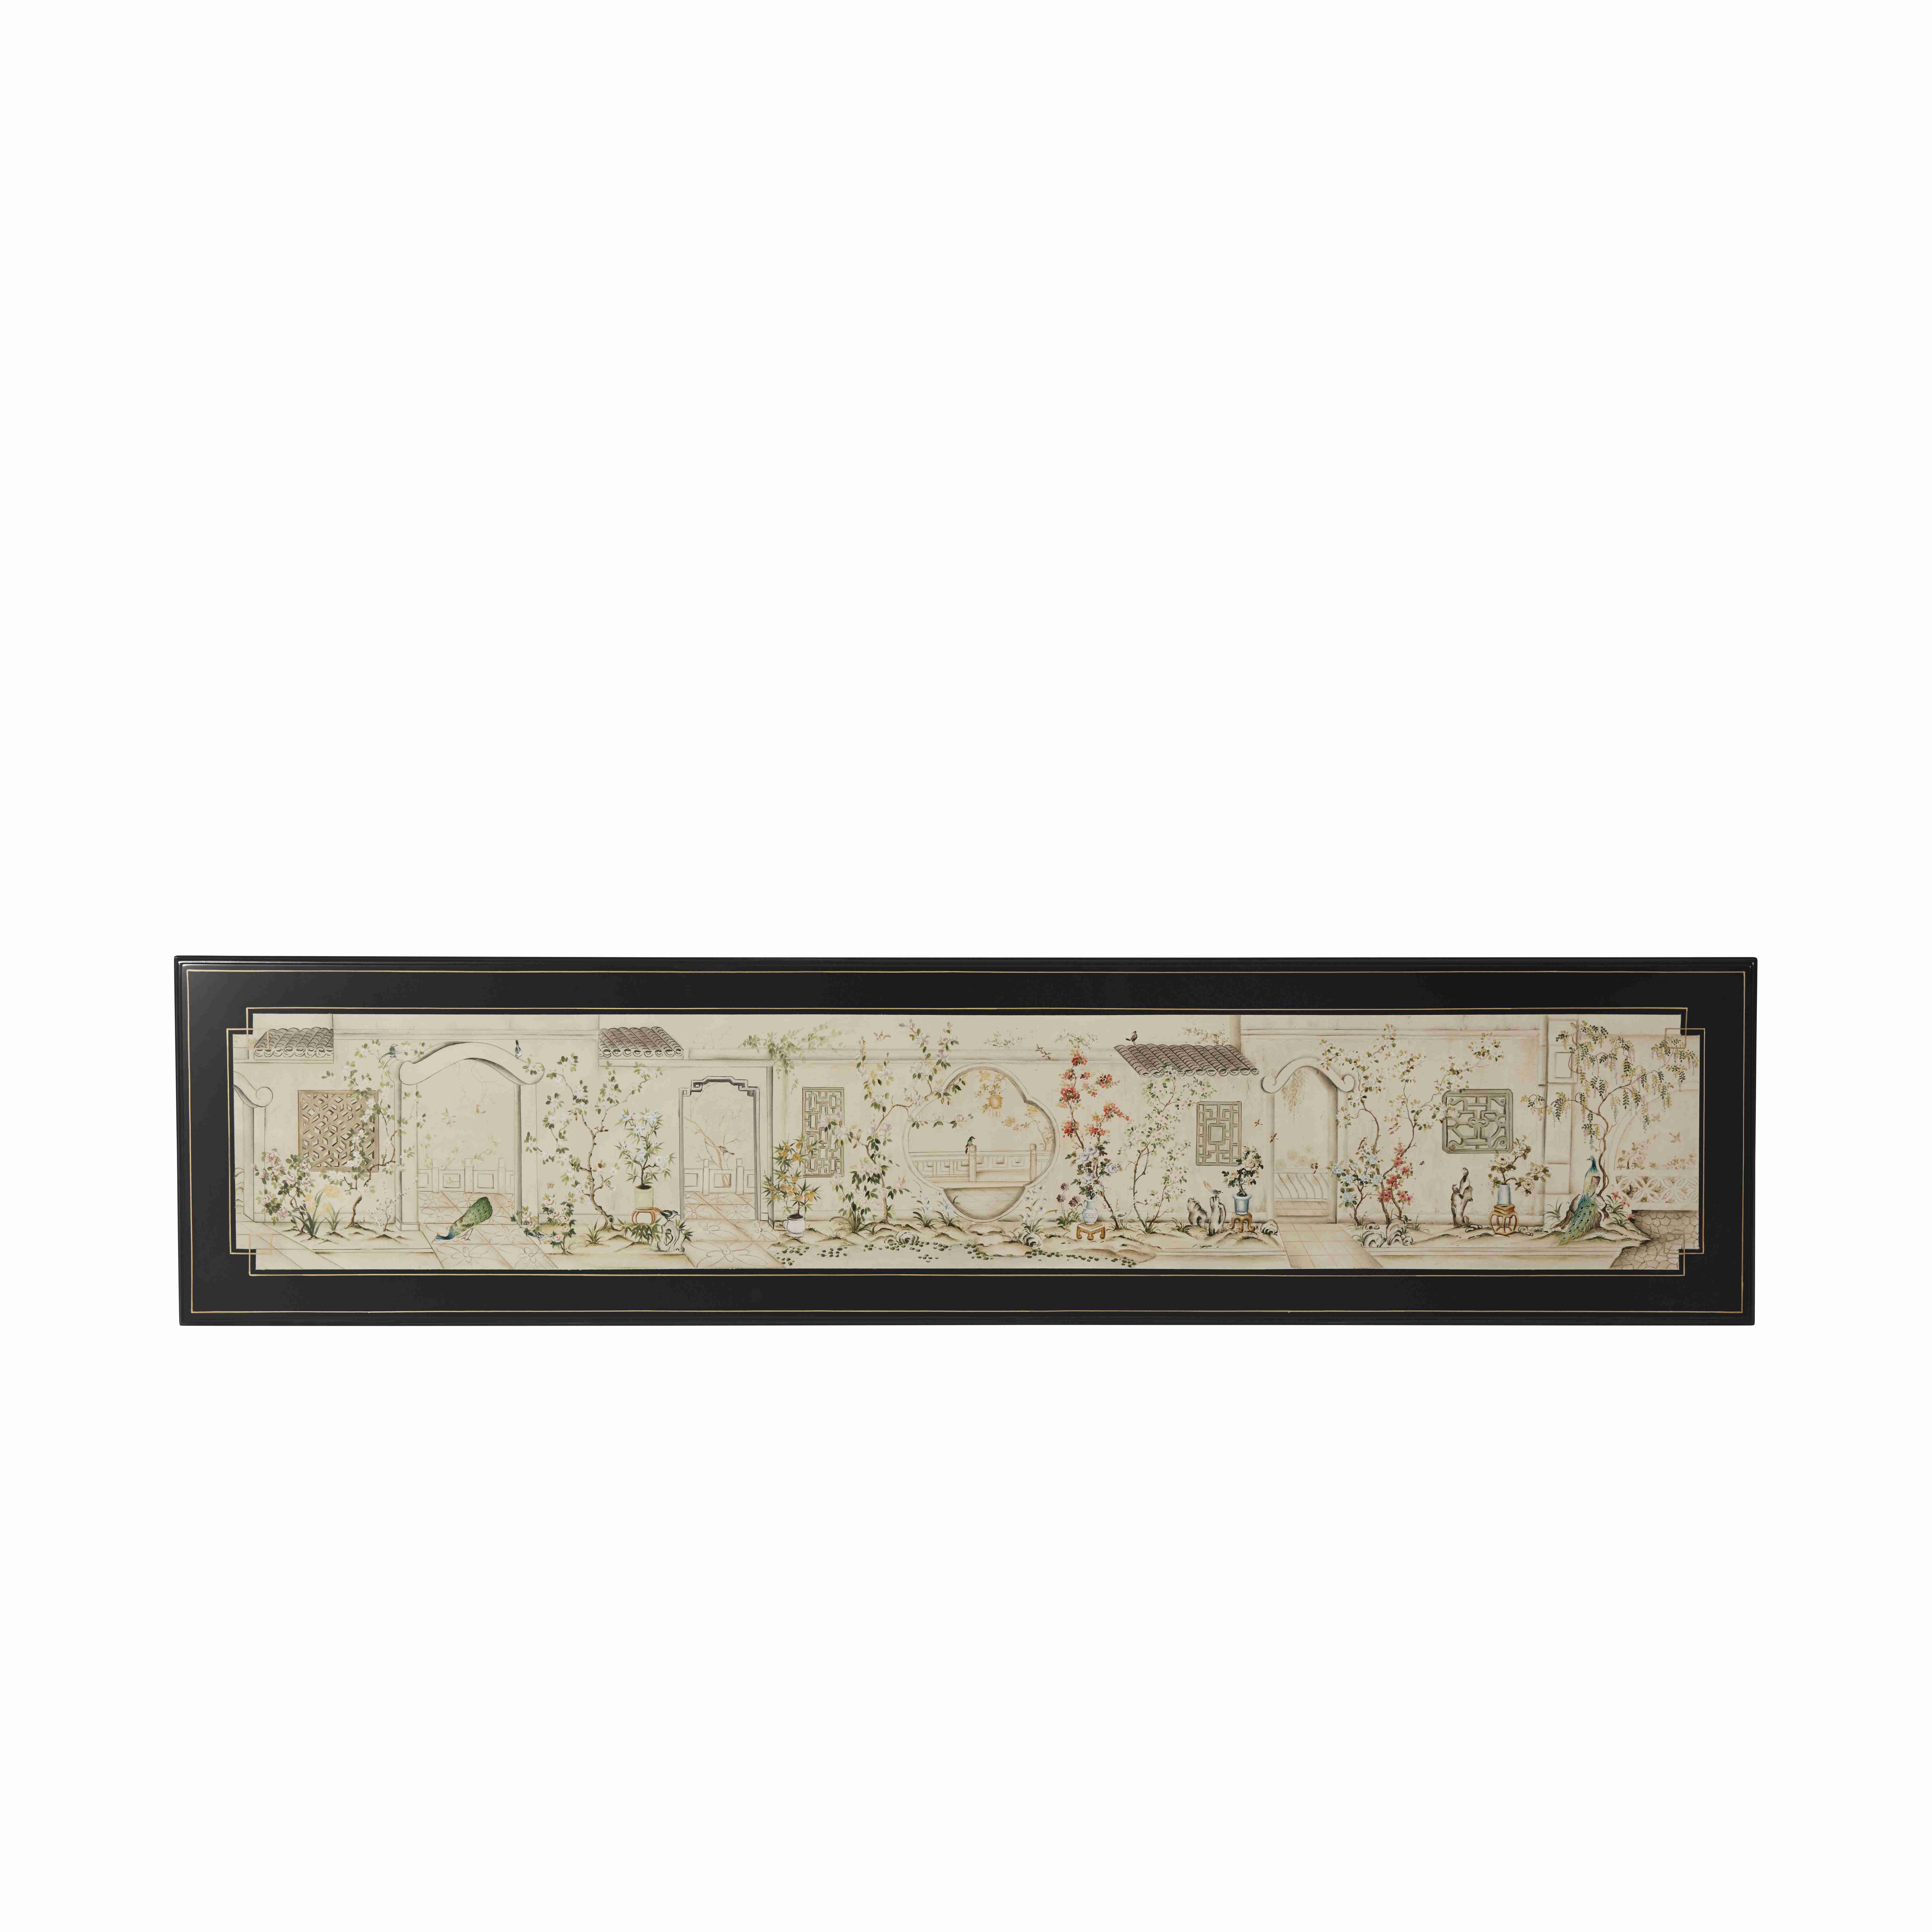 LONG HALL CHINOISERIE CONSOLE TABLE